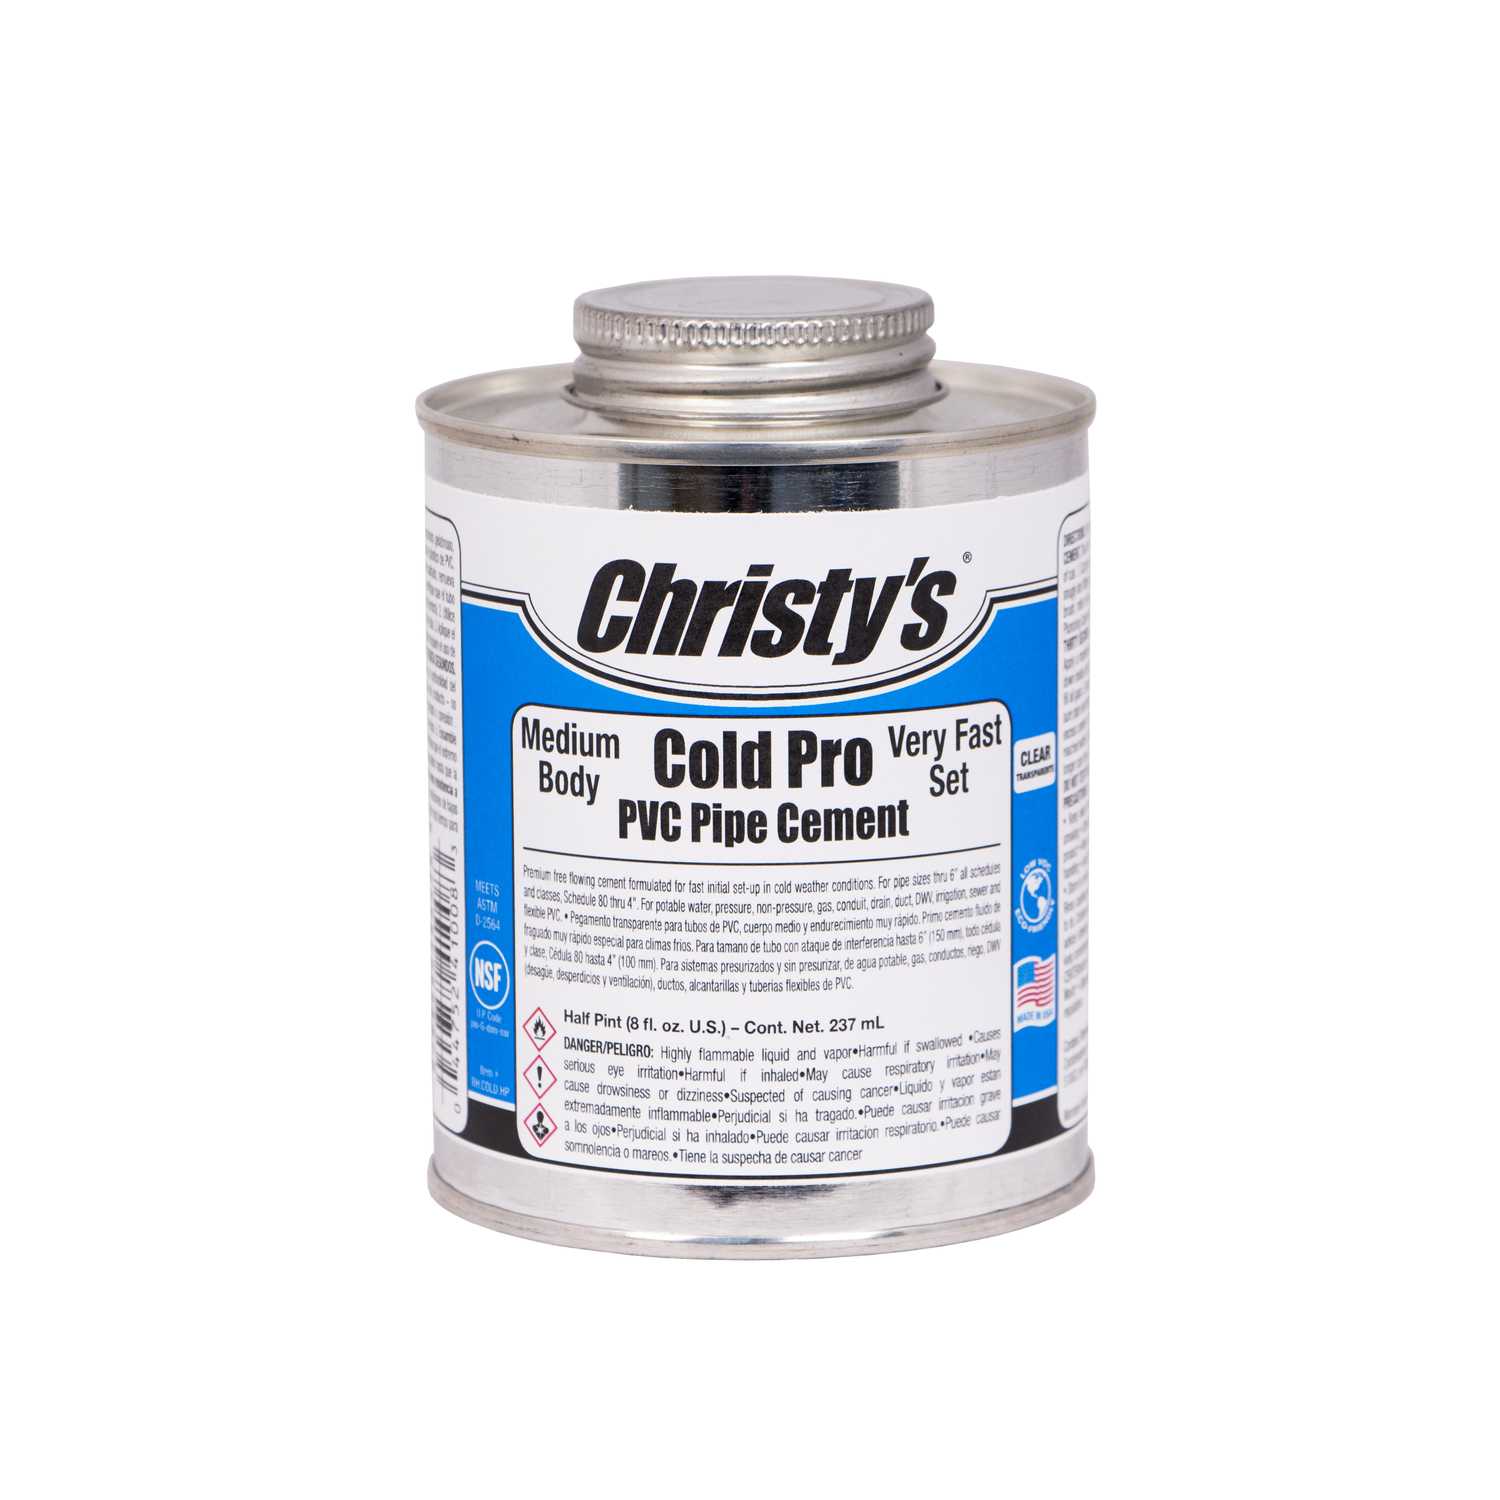 Christys Cold Pro Clear Cement For PVC 8 oz. - Ace Hardware